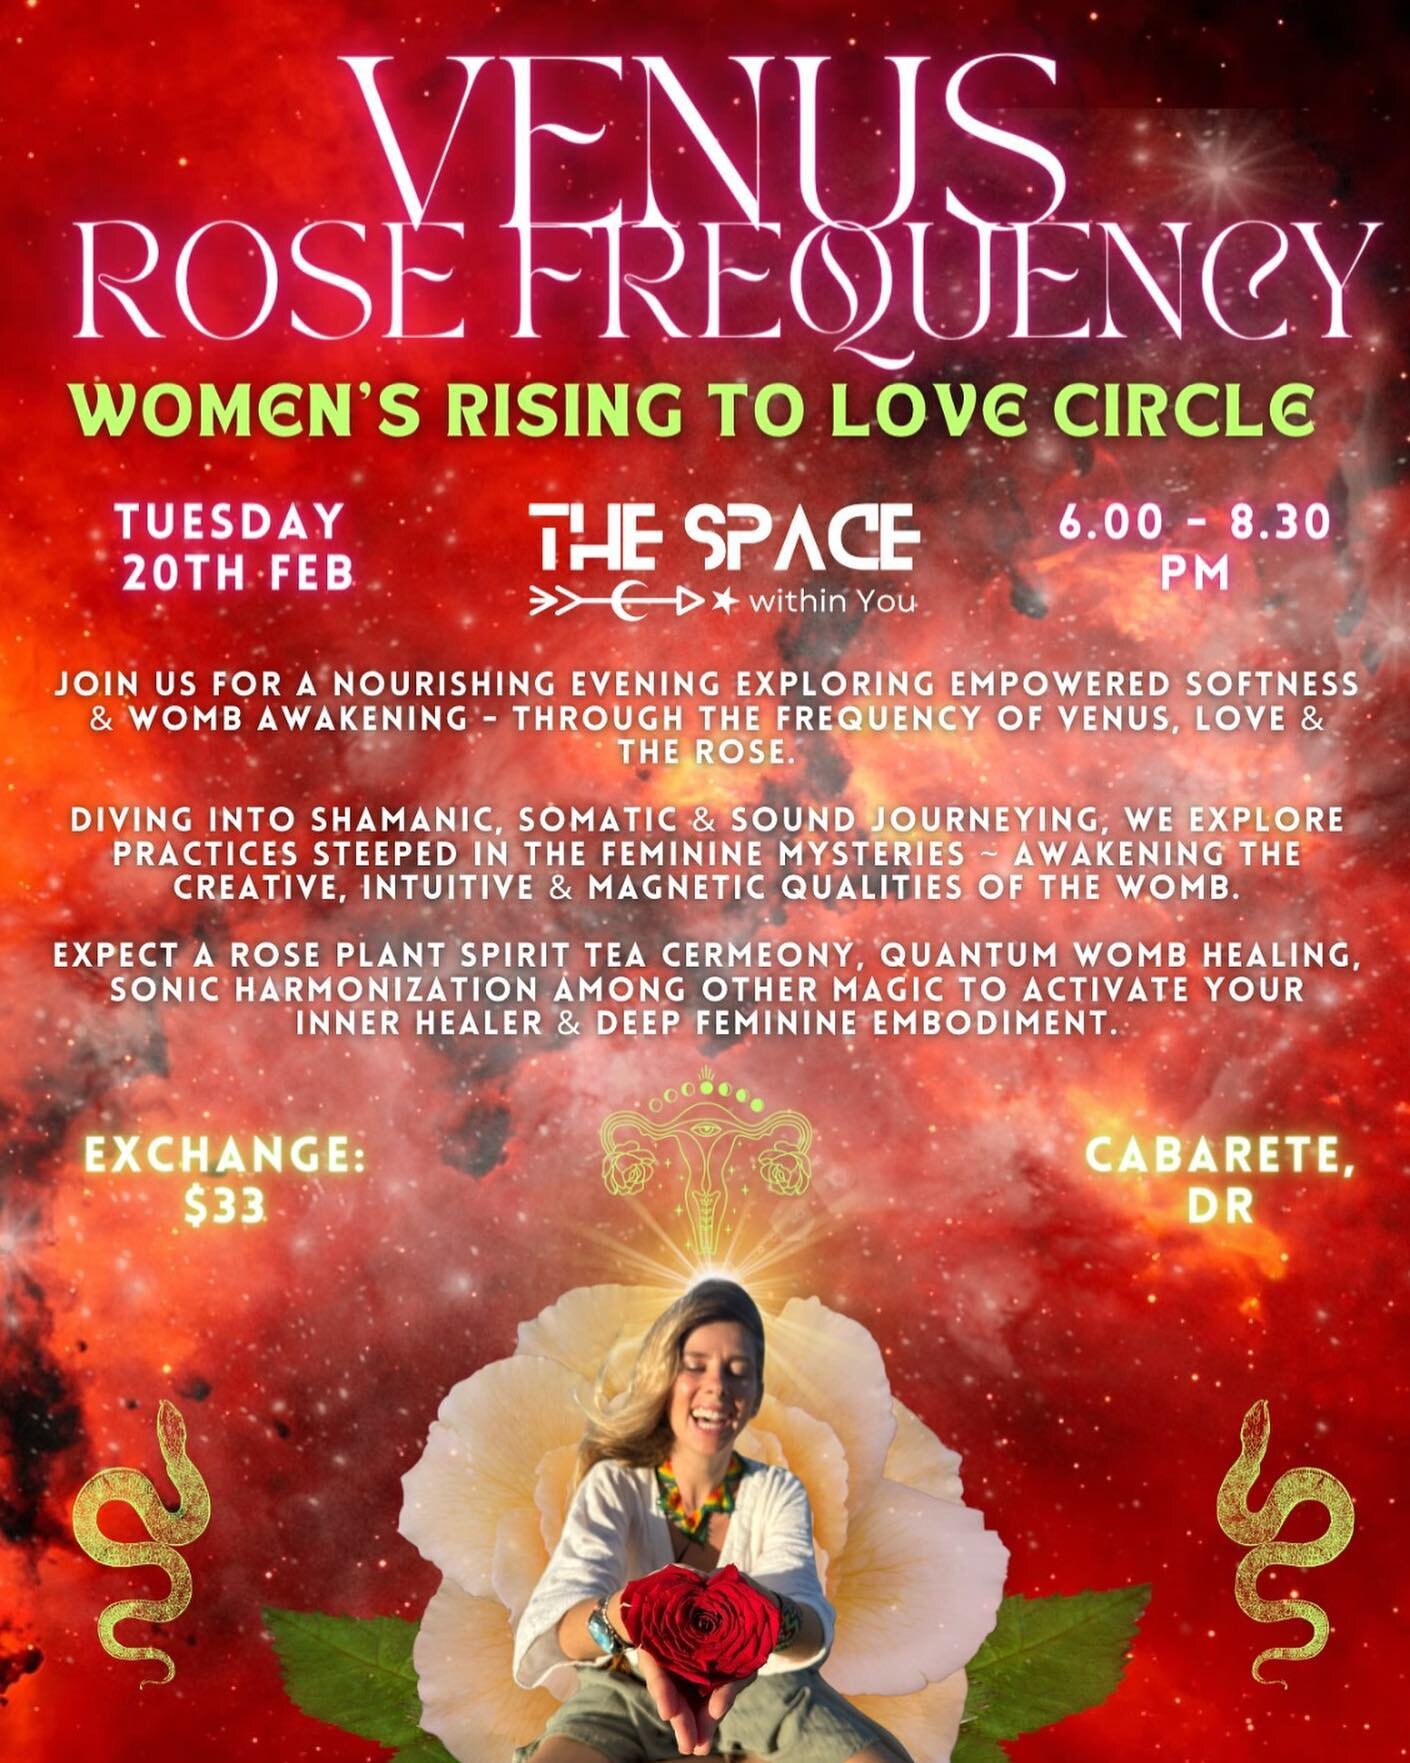 Sweet Sisters, us for a deeply nourishing evening, exploring *empowered softness* through  frequency of _Venus_ ⭐ _Love_ ❤️ &amp; the _Rose_ 🌹

Through Shamanic, Somatic &amp; Sound Journeying, we will explore practices steeped in the feminine myste